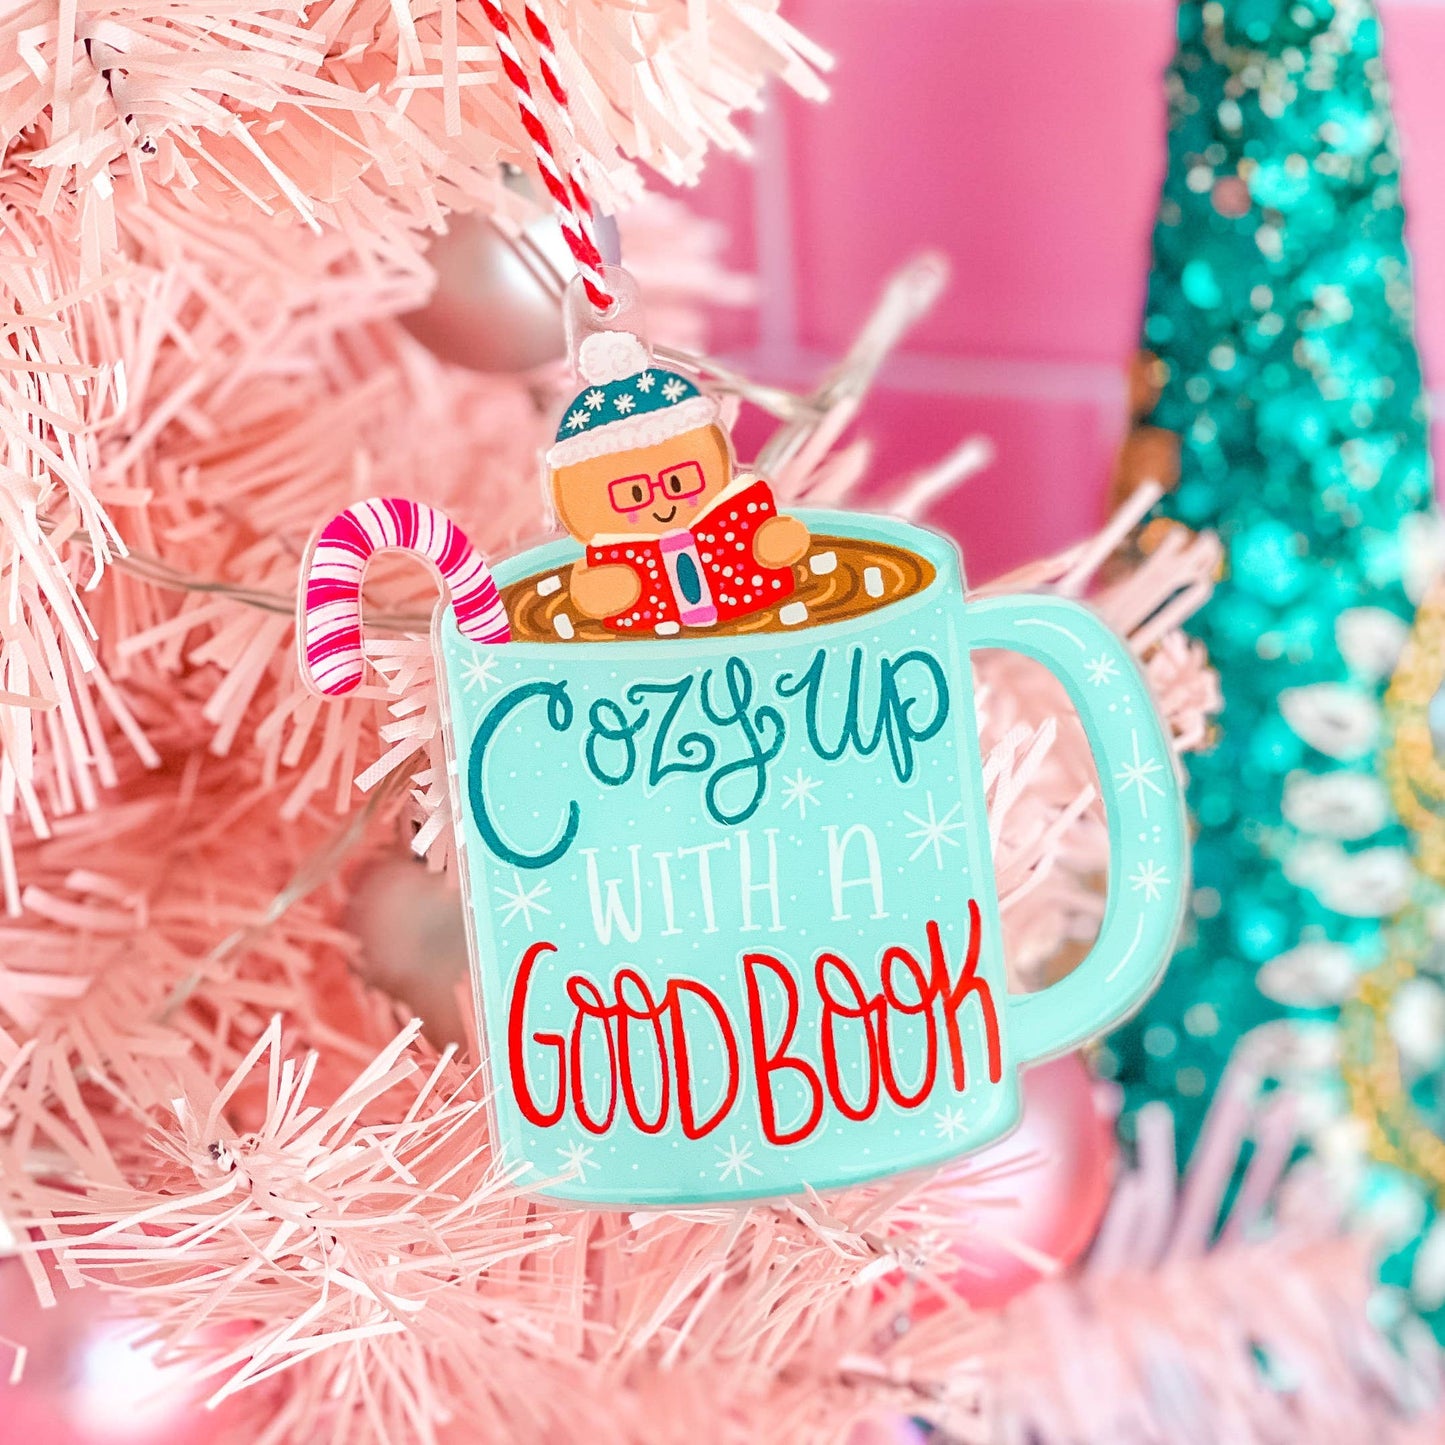 Emily Cromwell - Cozy Up With a Good Book Hot Cocoa Christmas Ornament